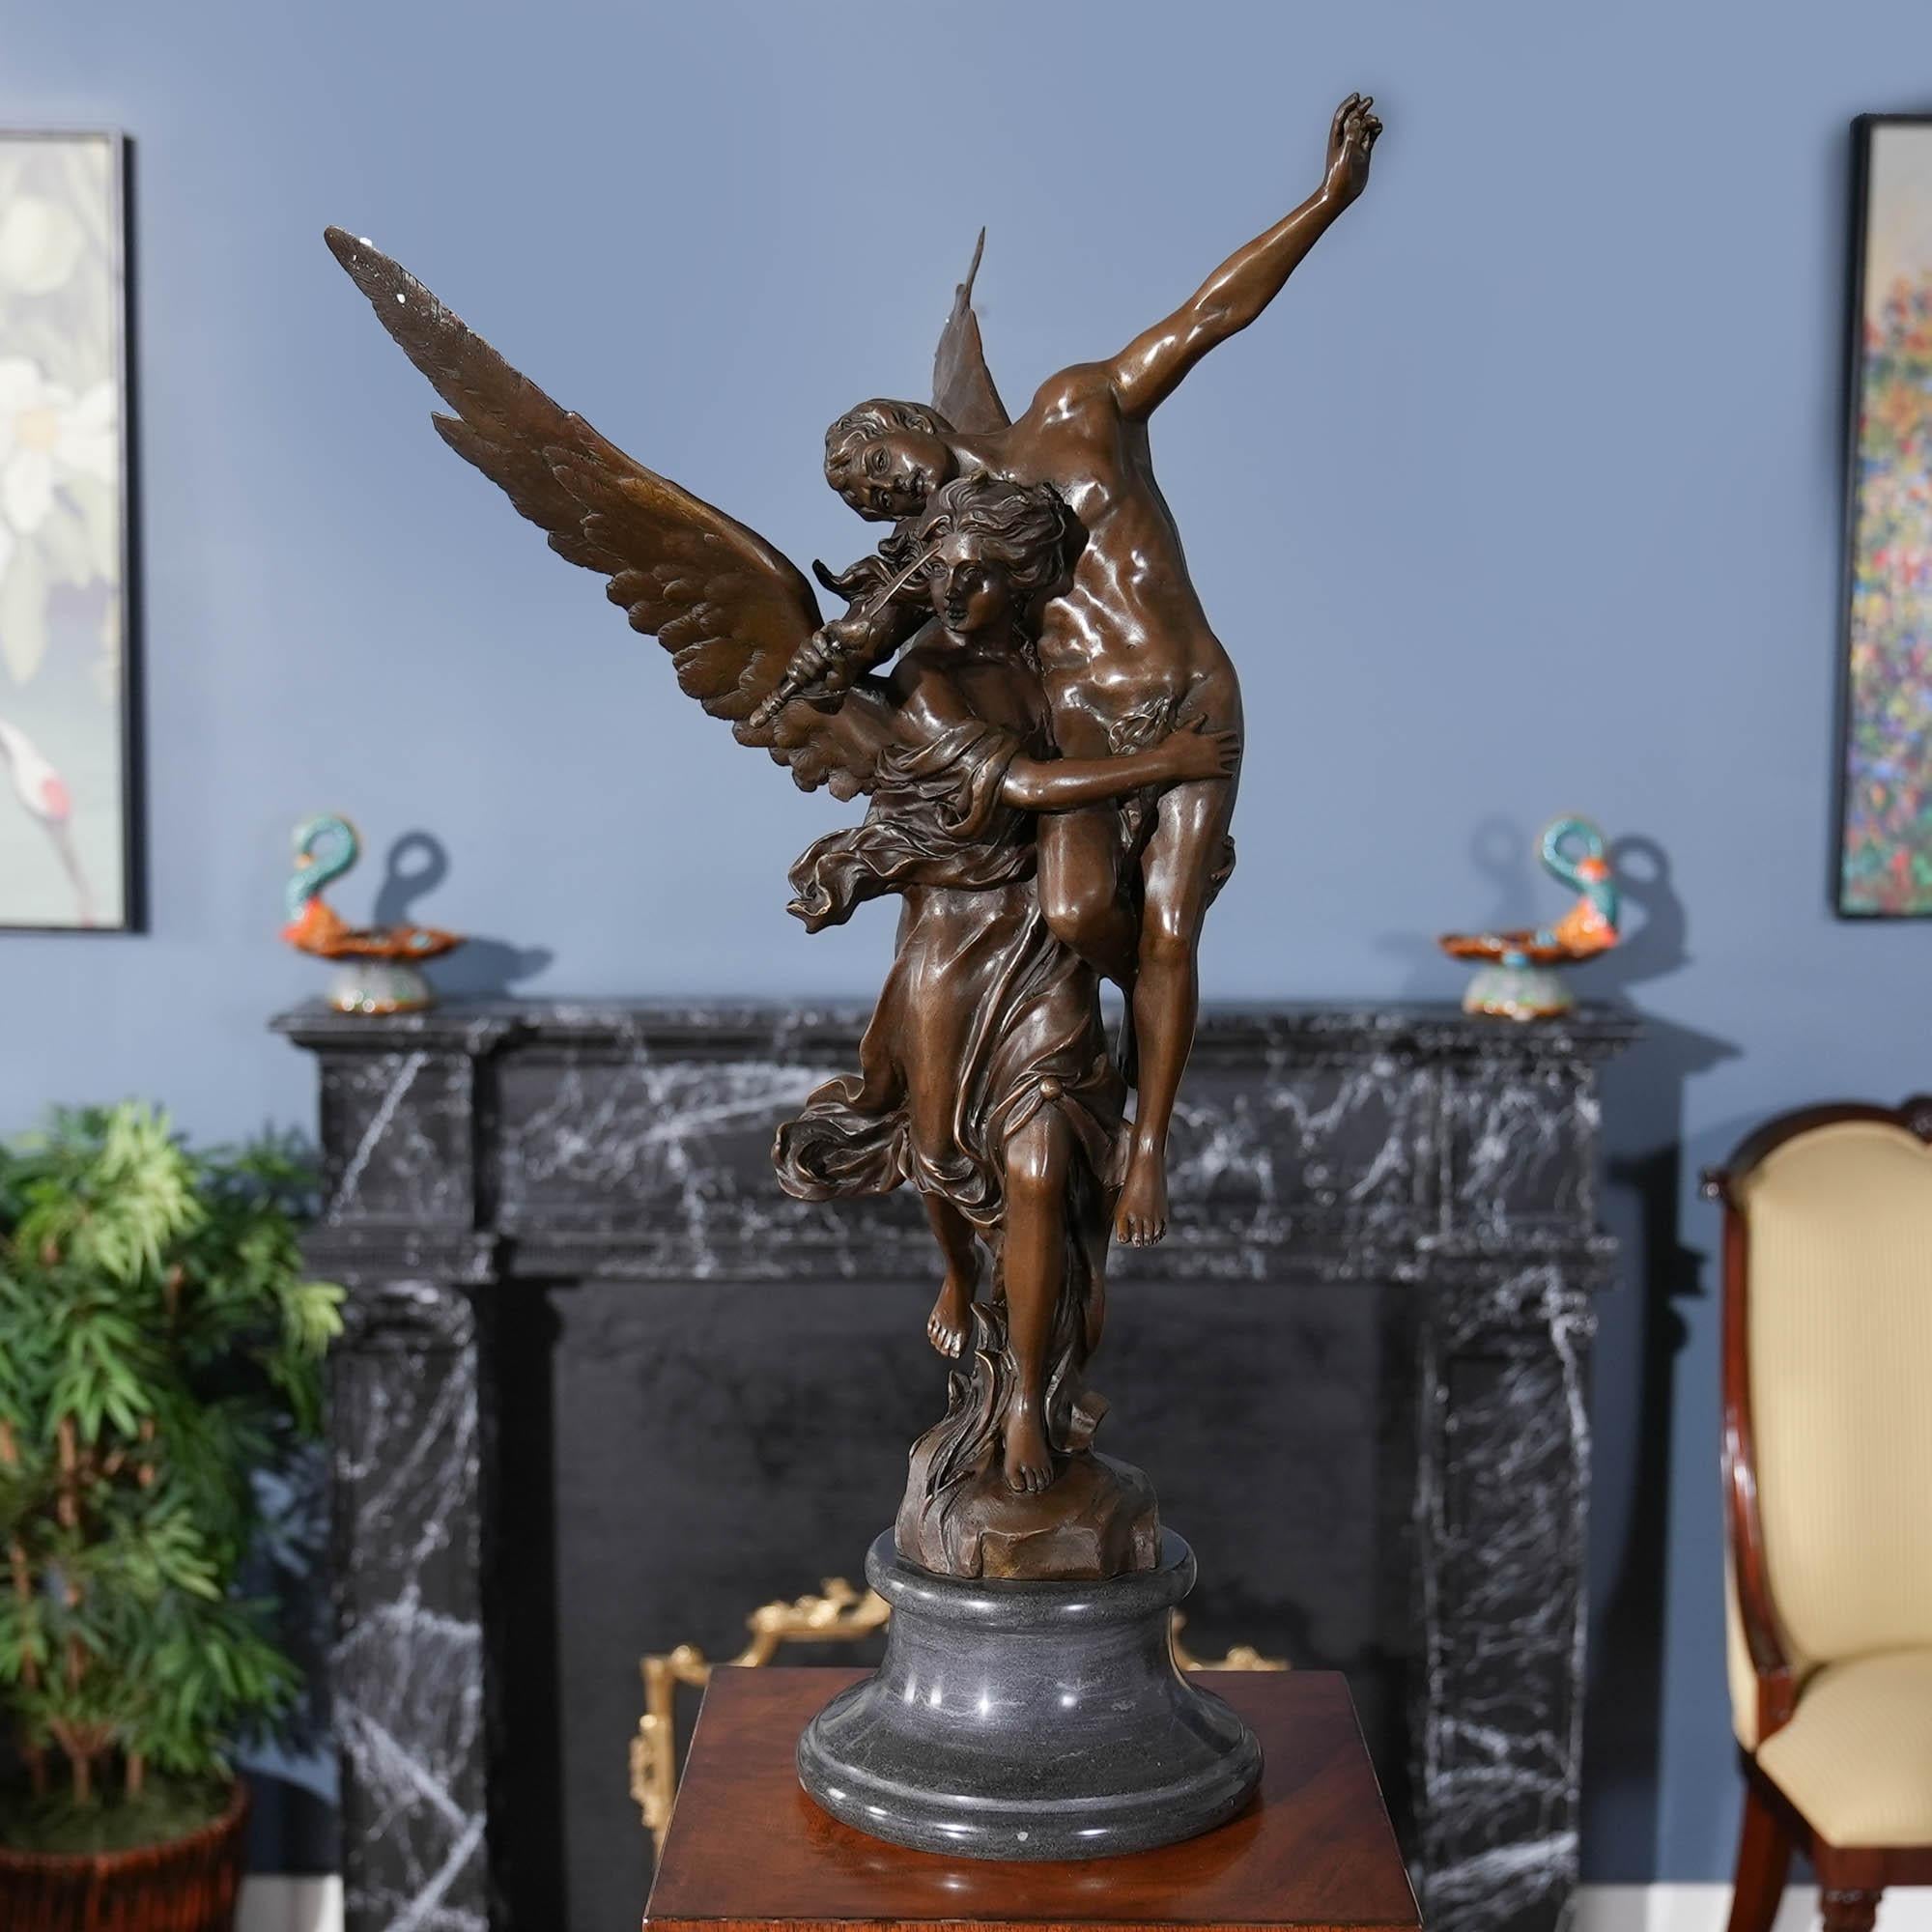 Graceful even when standing still the Bronze Fallen Soldier on Marble Base is a striking addition to any setting. Using traditional lost wax casting methods the Bronze Fallen Soldier statue has hand chaised details added to give a high level of